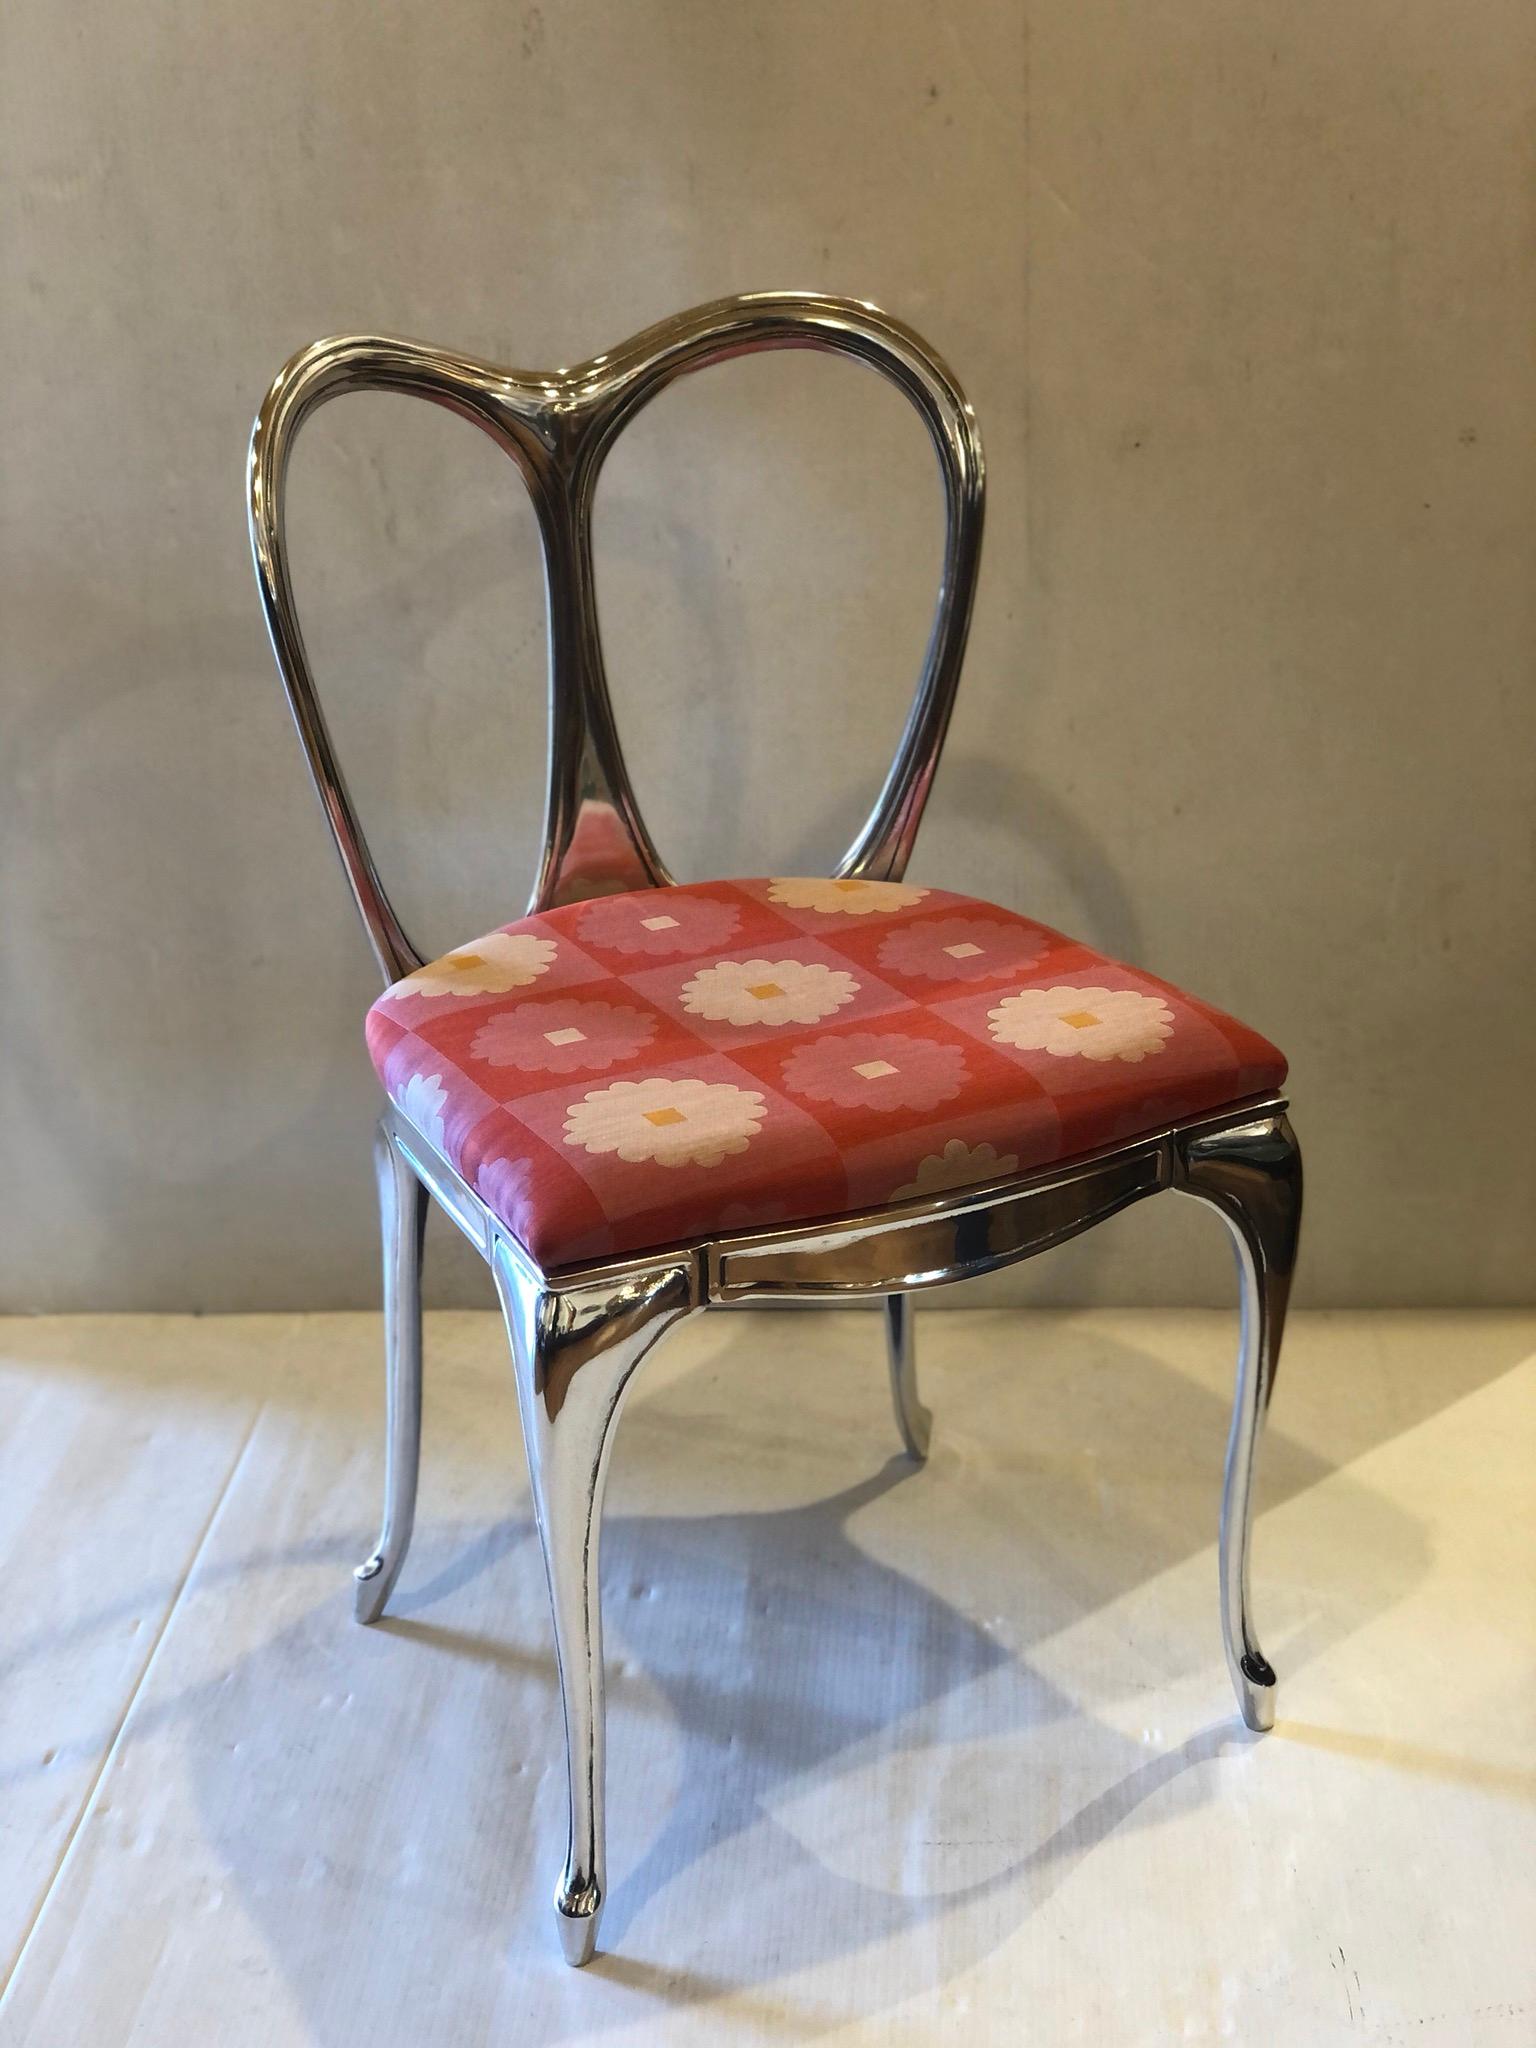 Beautiful and unique rare polished cast aluminum vanity chair, with new Maharam fabric this chair circa 1950s has been totally striped and polished to this chrome mirror finish, the shape and size its unique.